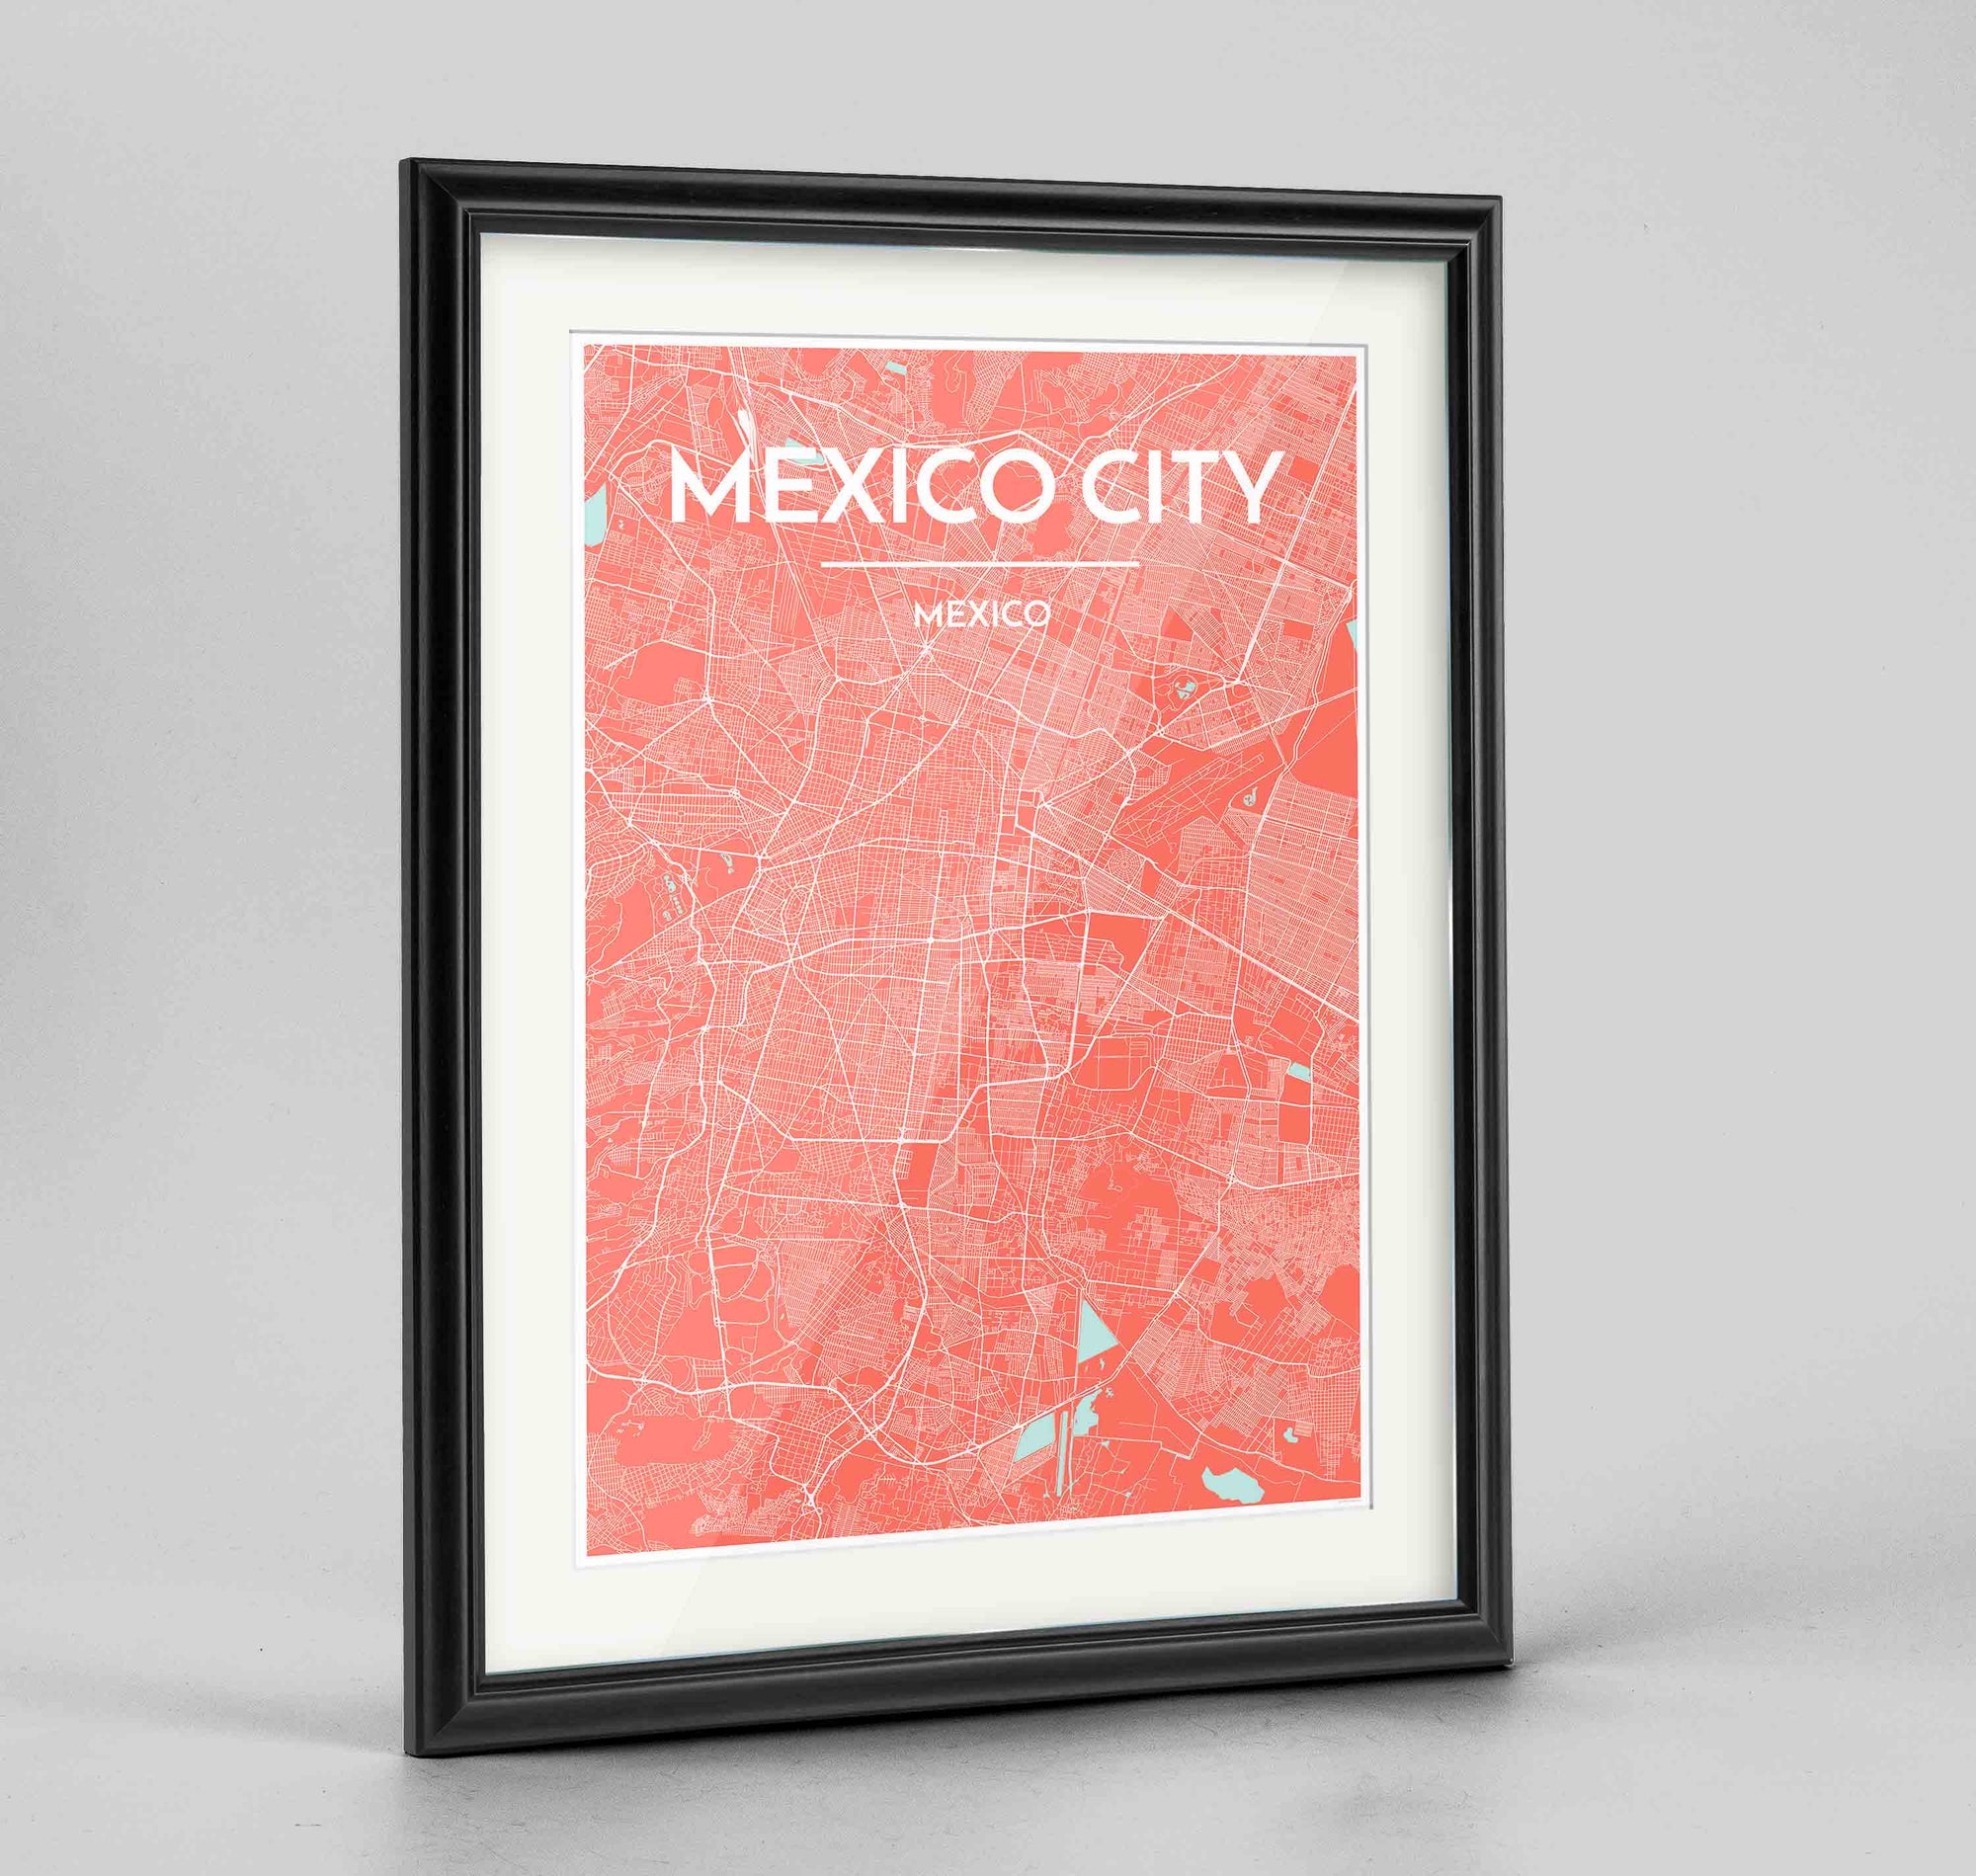 Framed Mexico City Map Art Print 24x36" Traditional Black frame Point Two Design Group